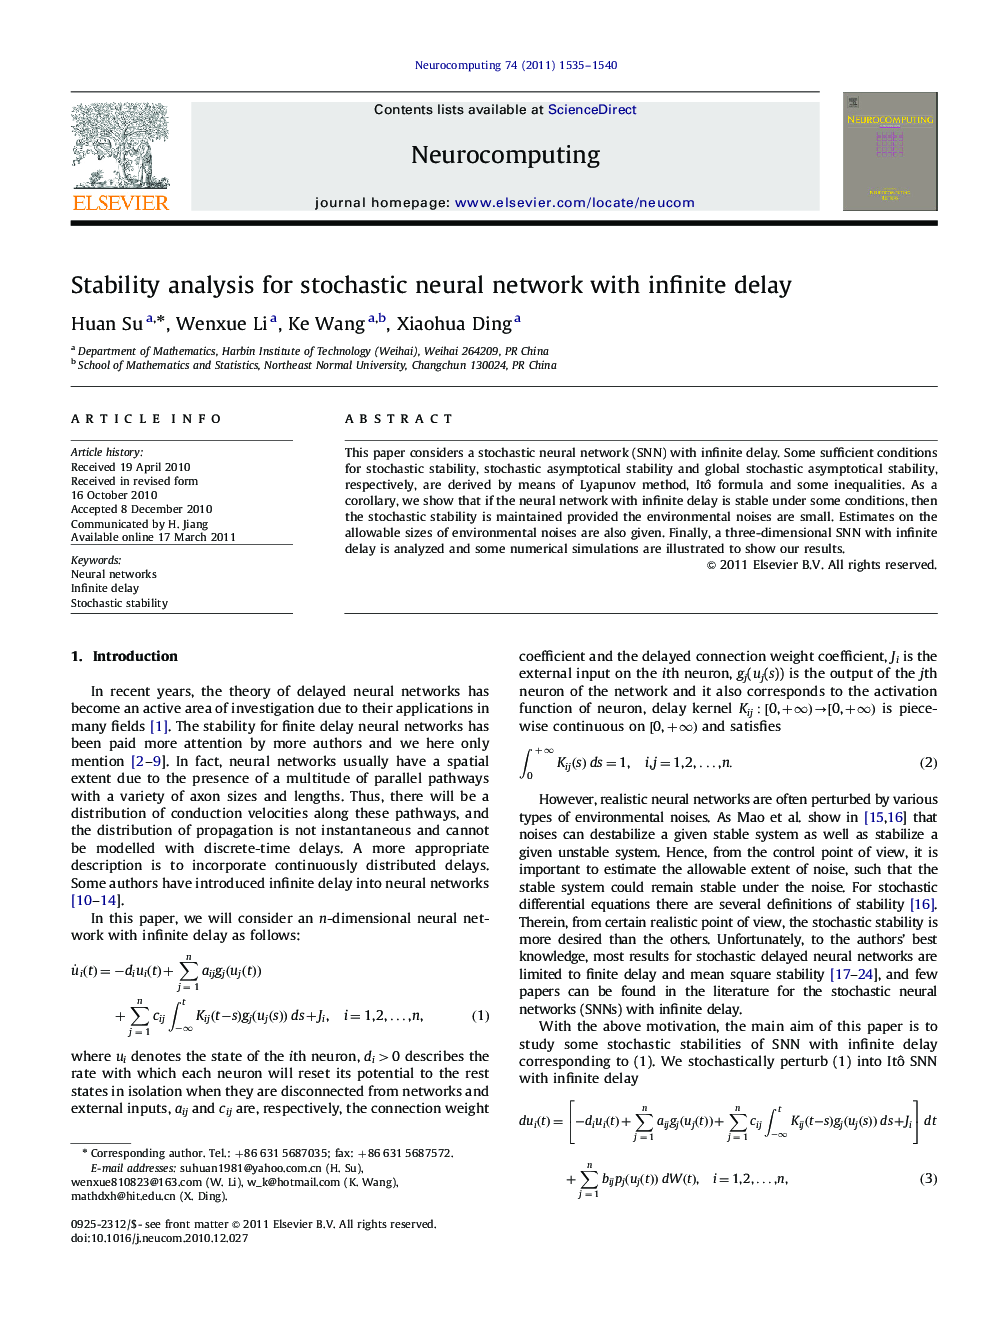 Stability analysis for stochastic neural network with infinite delay